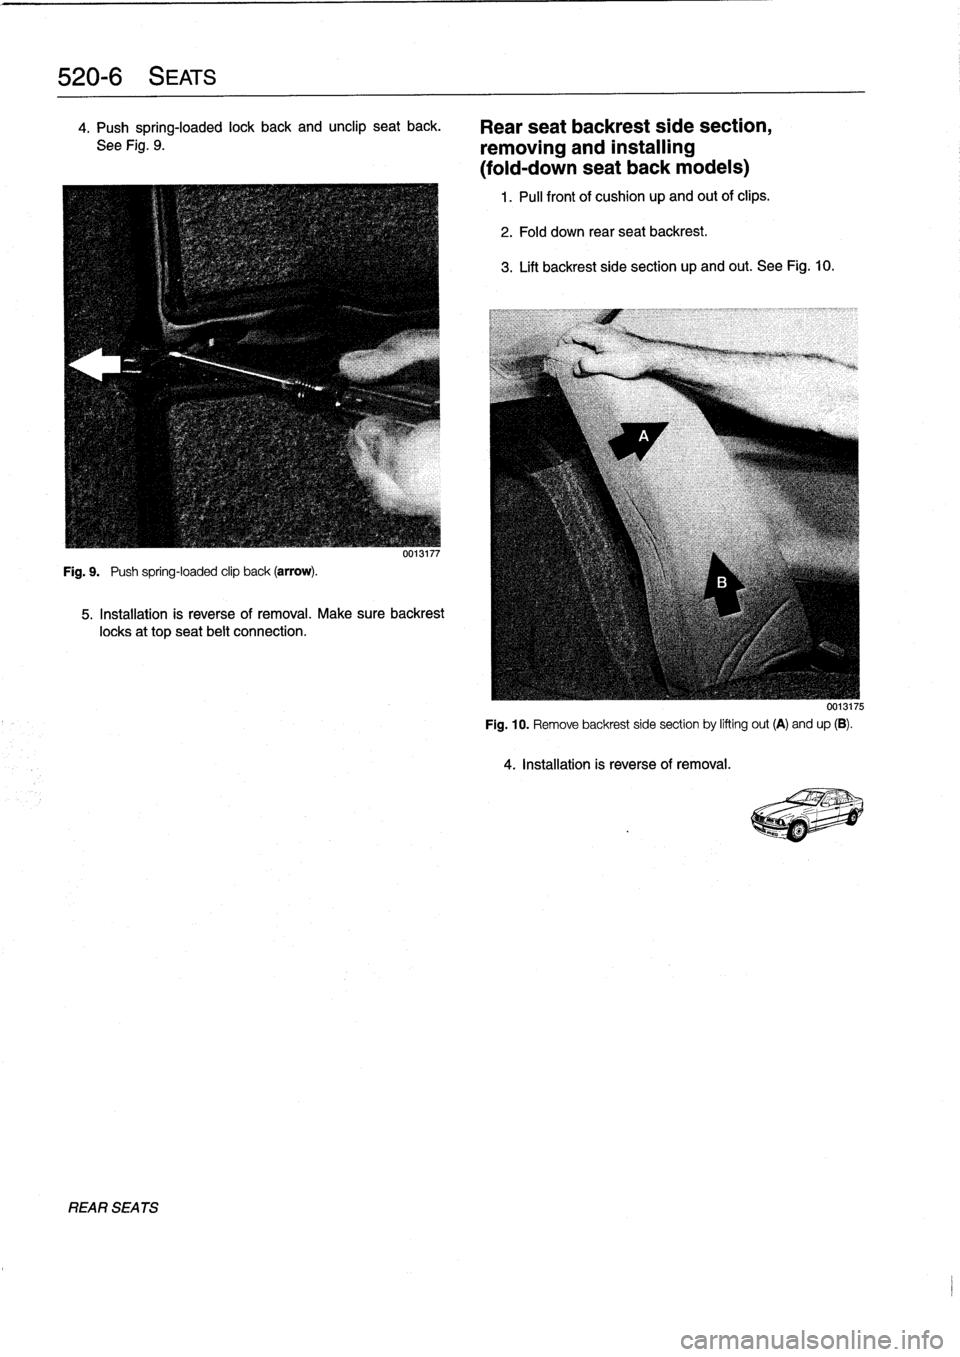 BMW 323i 1993 E36 Workshop Manual 
520-
6
SEATS

4
.
Push
spring-loaded
lock
back
and
unclip
seat
back
.

See
Fig
.
9
.

Fig
.
9
.

	

Push
spring-loaded
clip
back
(arrow)
.

UU13117

5
.
Installation
is
reverse
of
removal
.
Make
sure